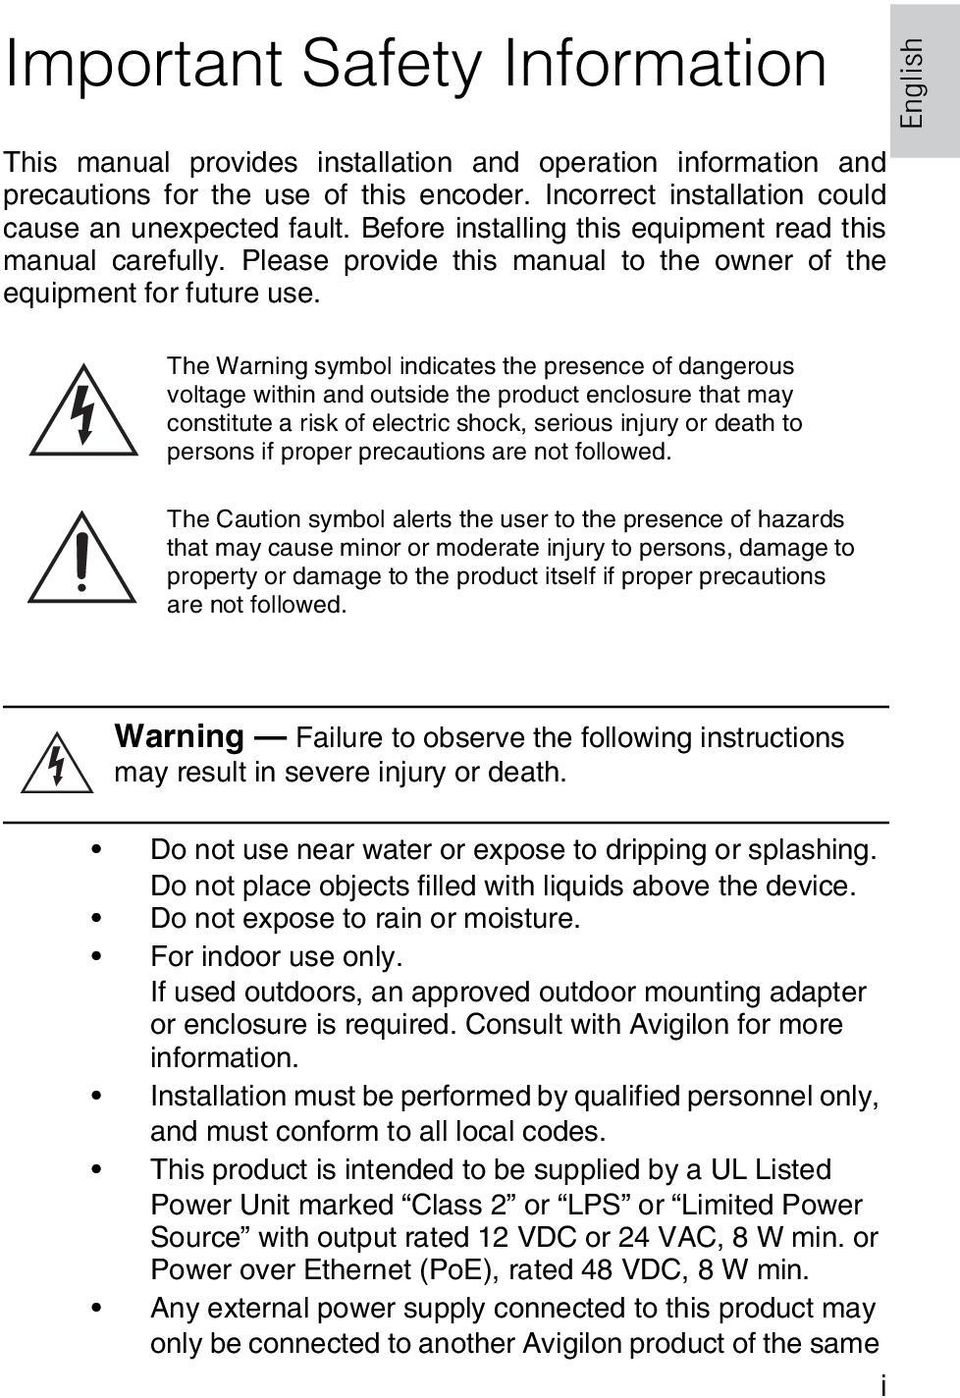 The Warning symbol indicates the presence of dangerous voltage within and outside the product enclosure that may constitute a risk of electric shock, serious injury or death to persons if proper